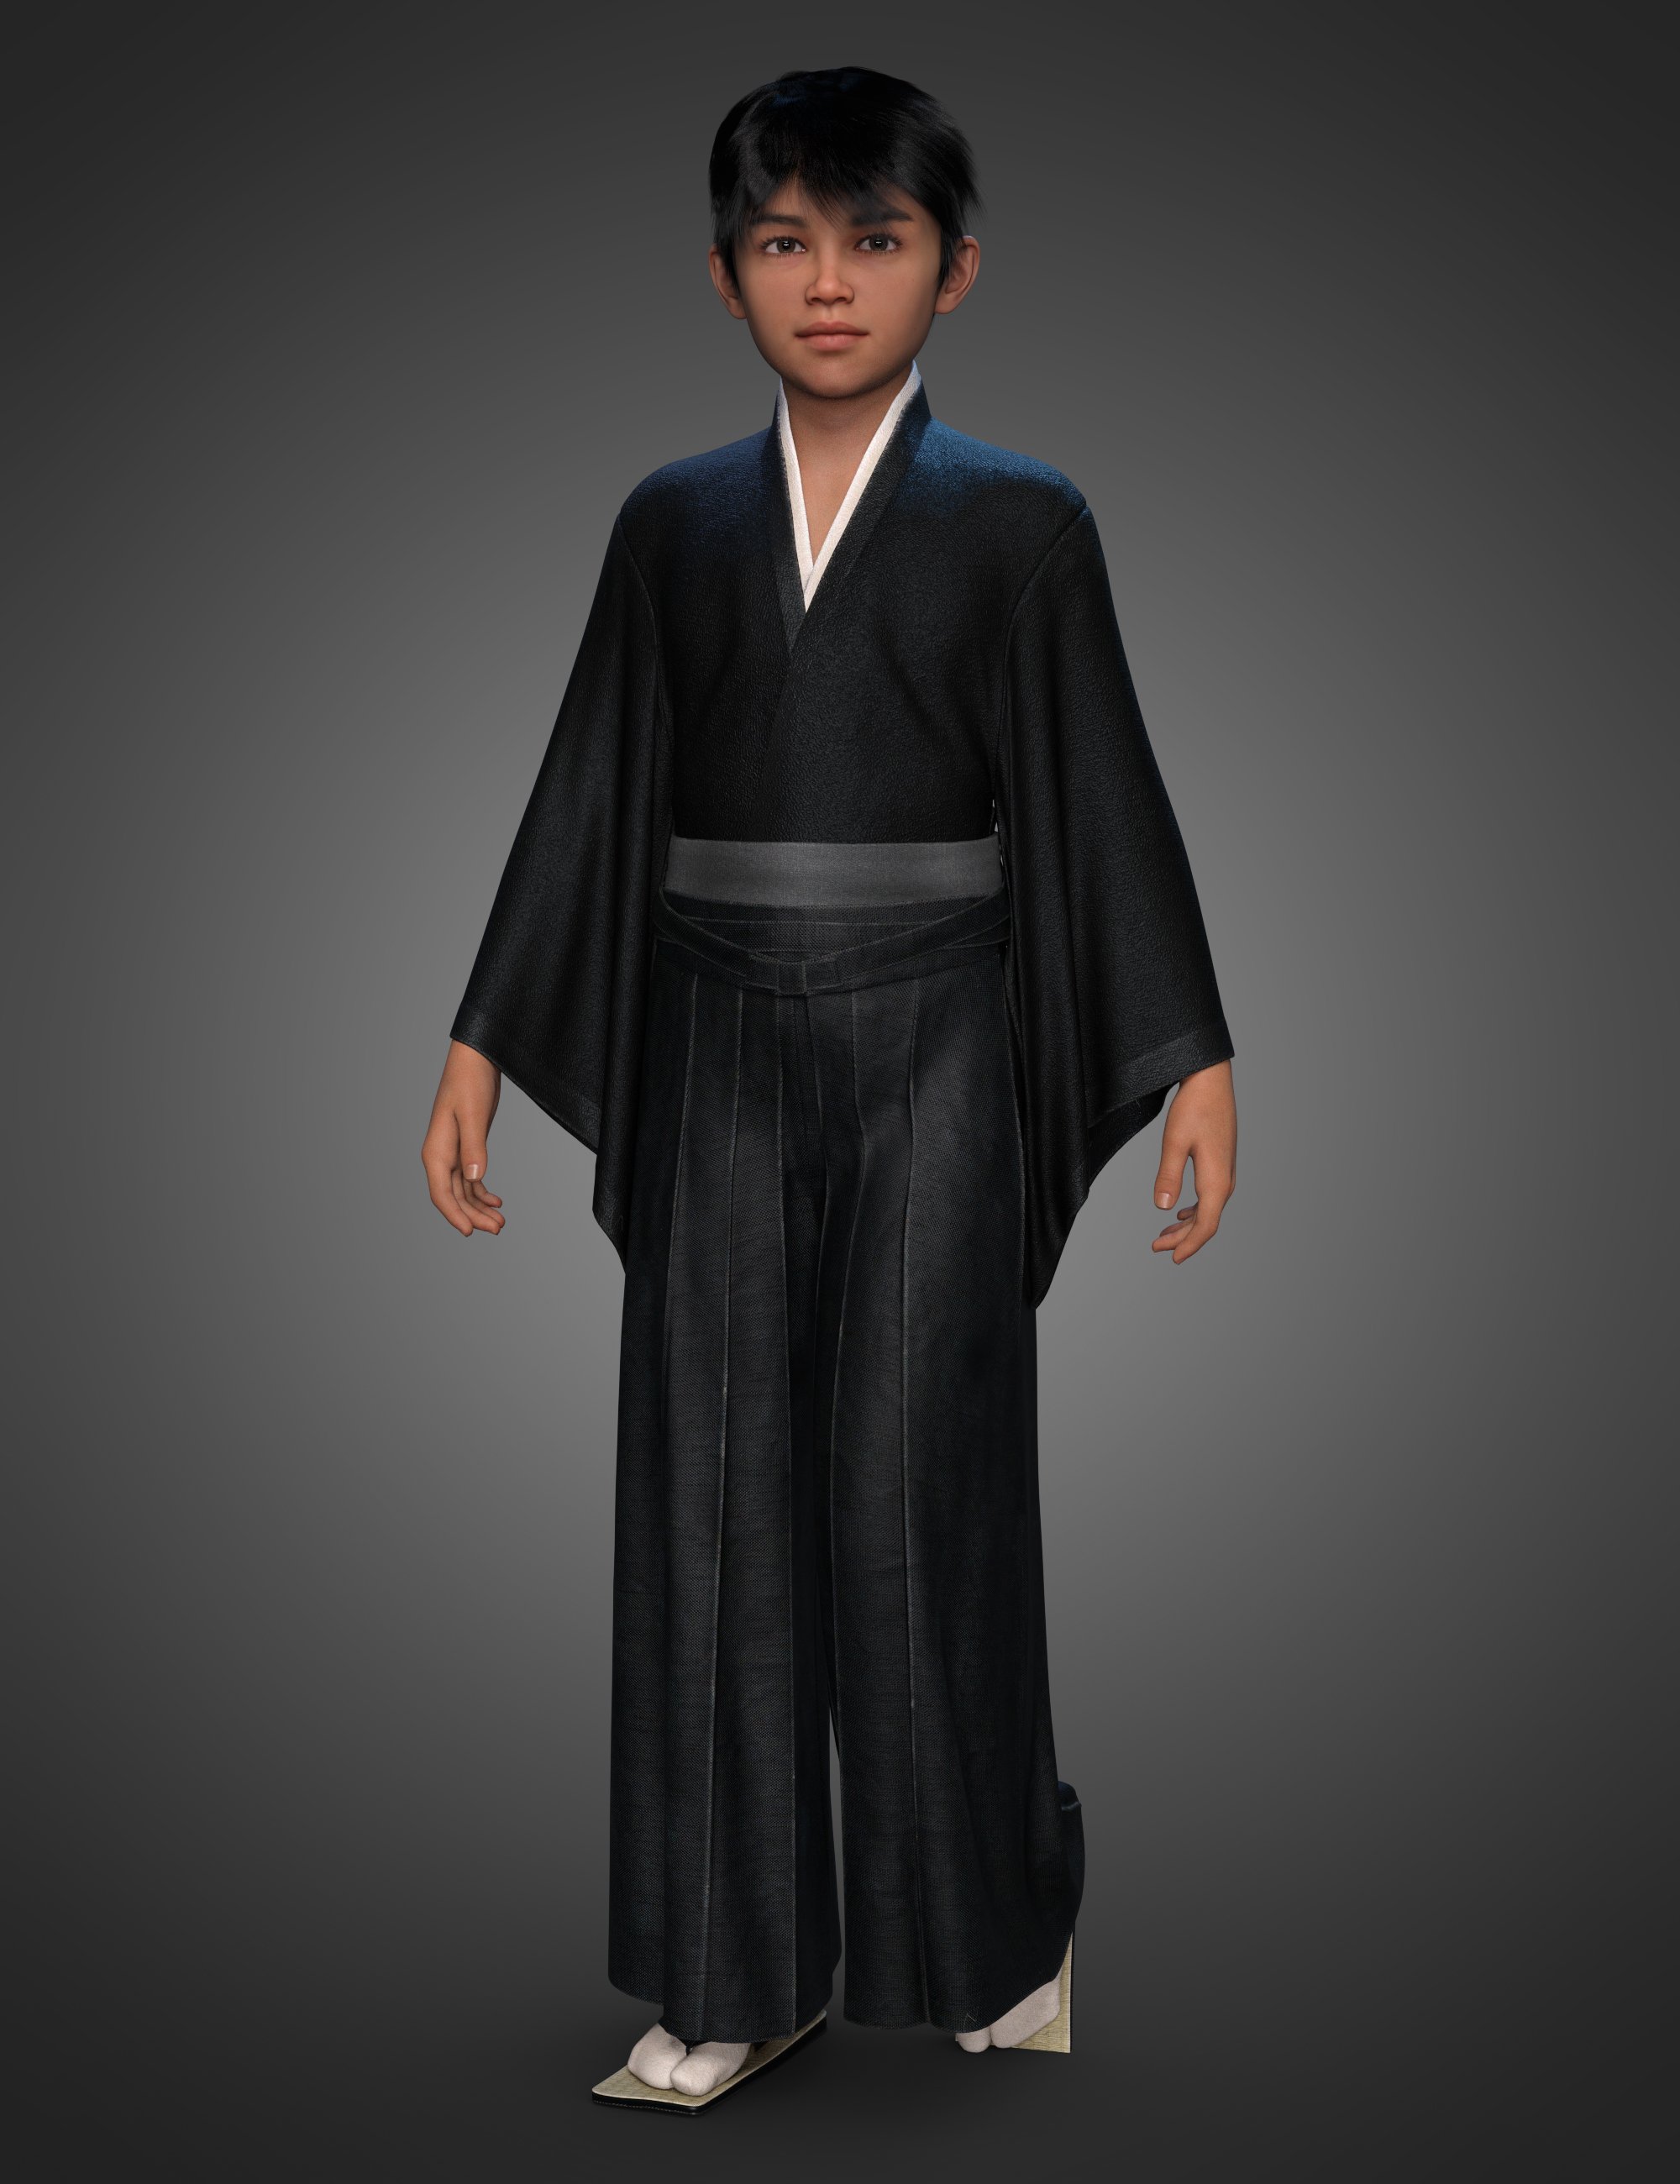 dForce Hakama and Kimono Outfit for Genesis 8.1 Male